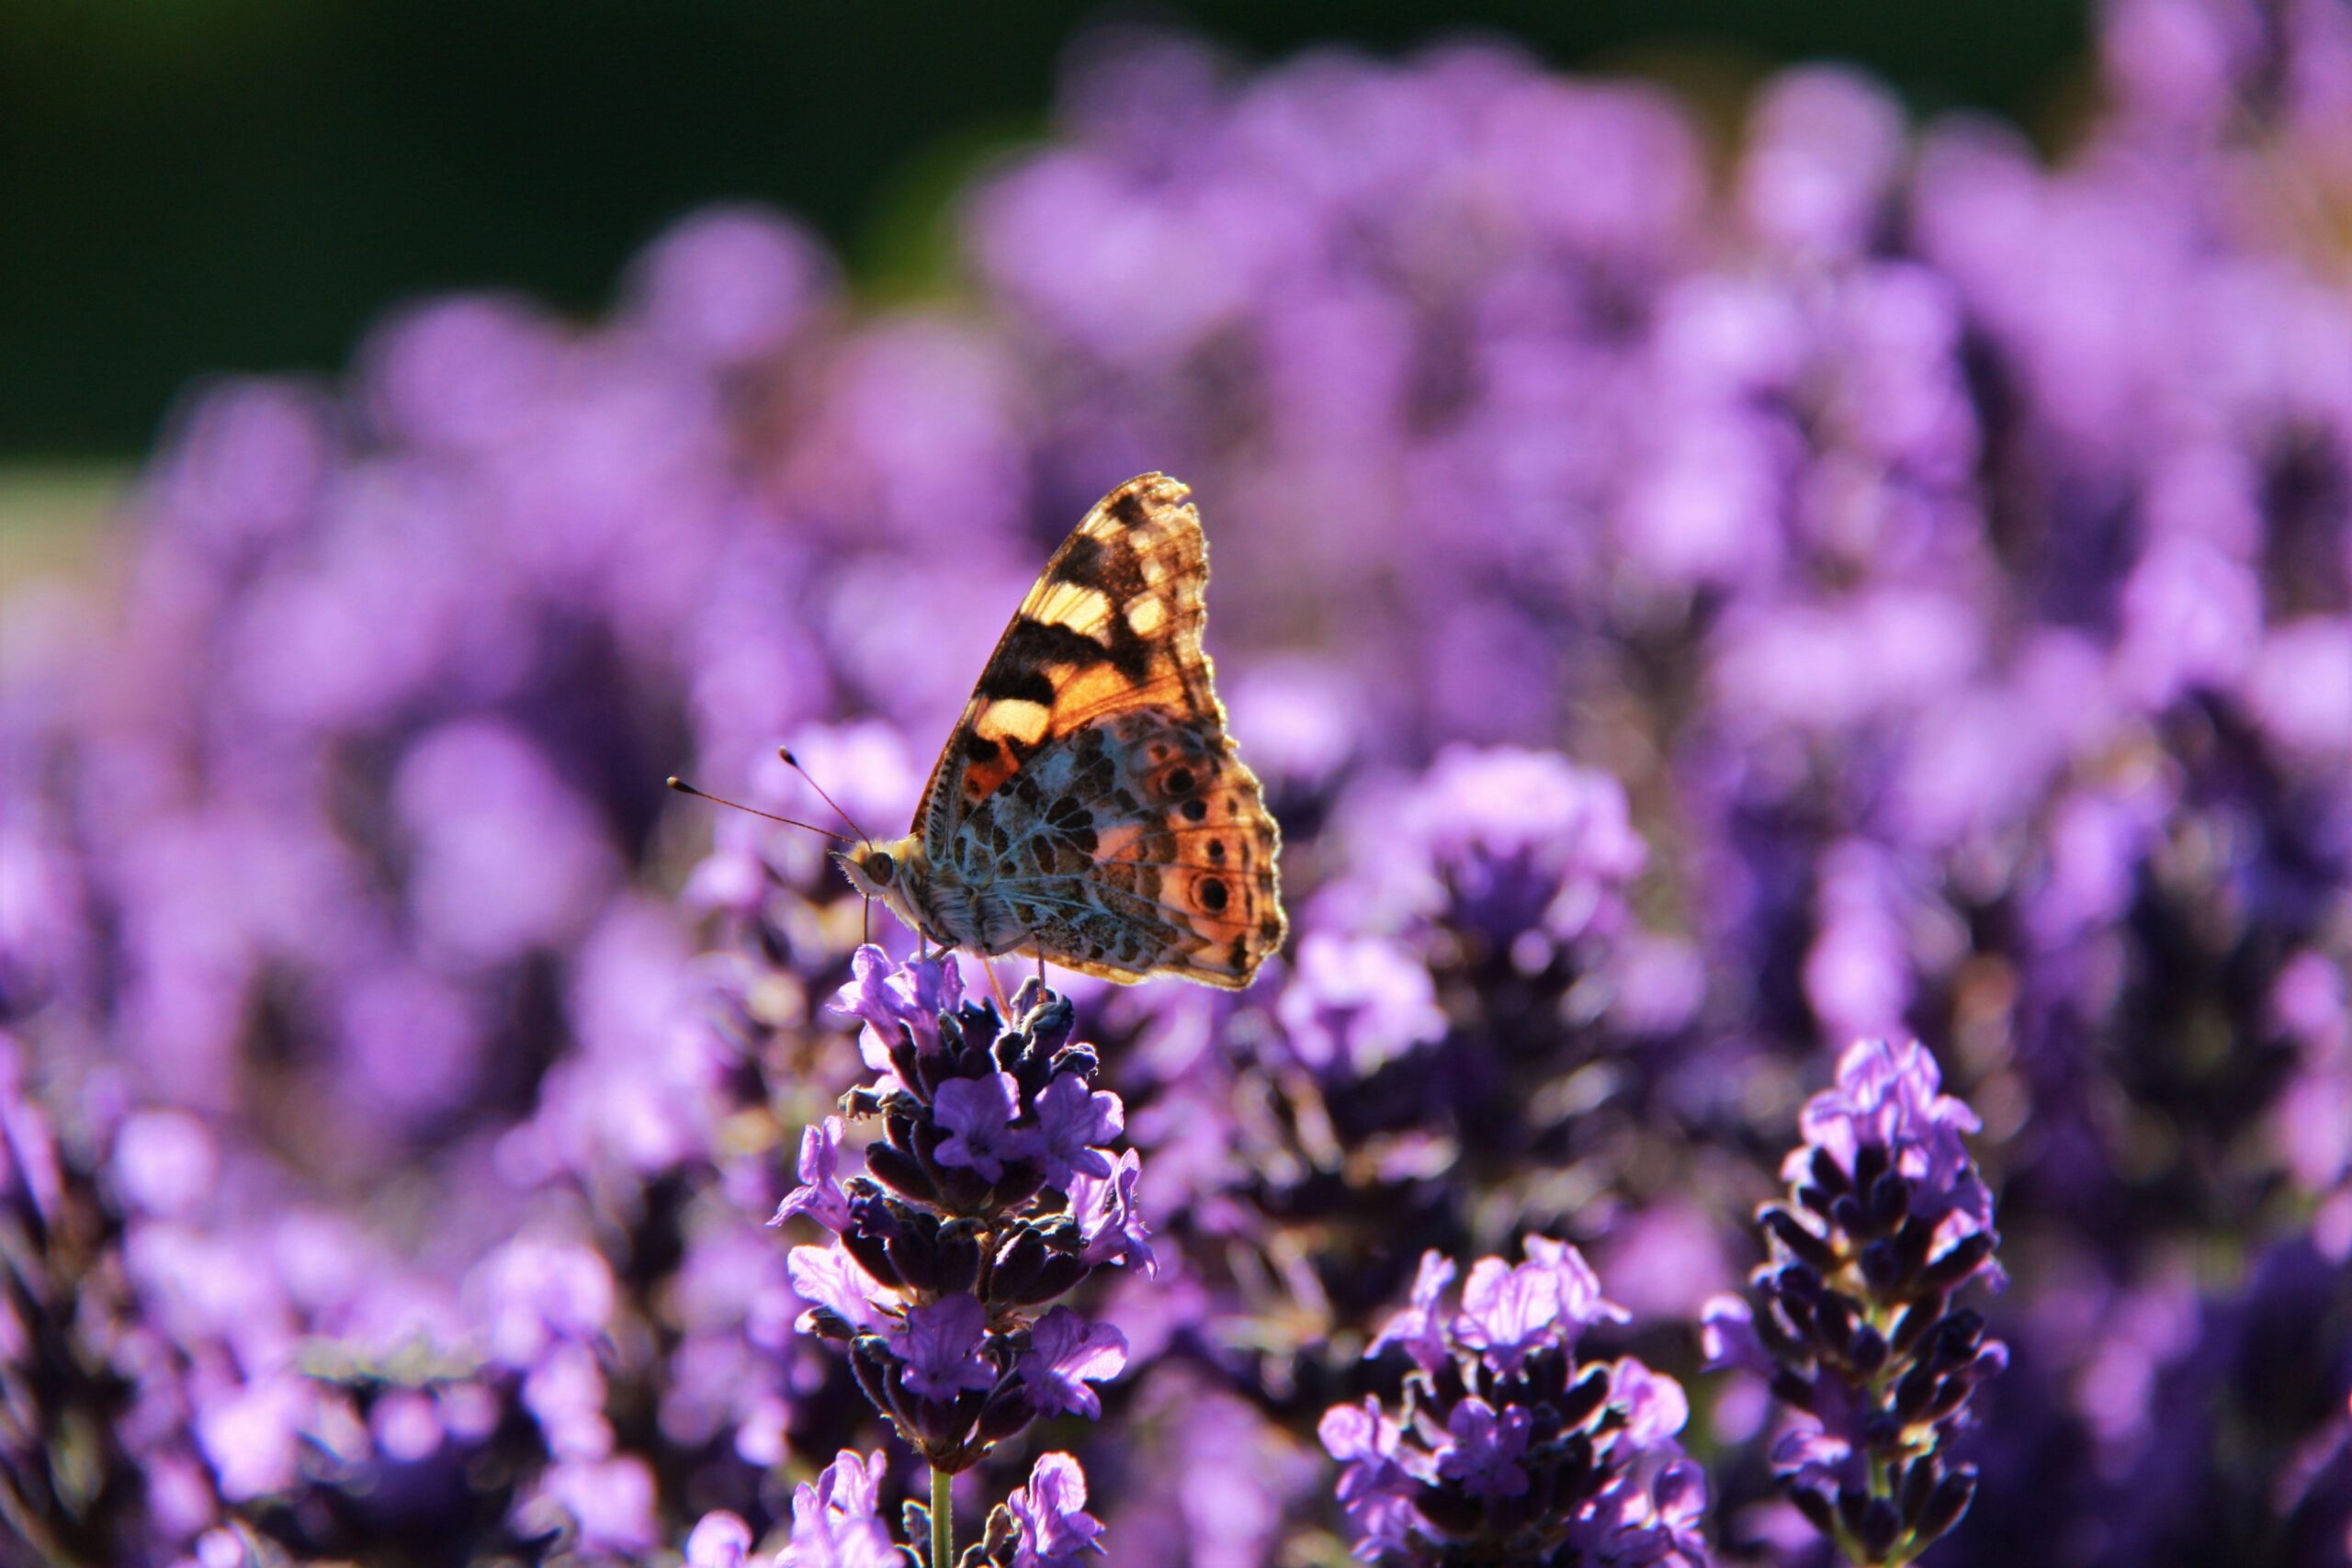 Transform your backyard into a butterfly’s paradise